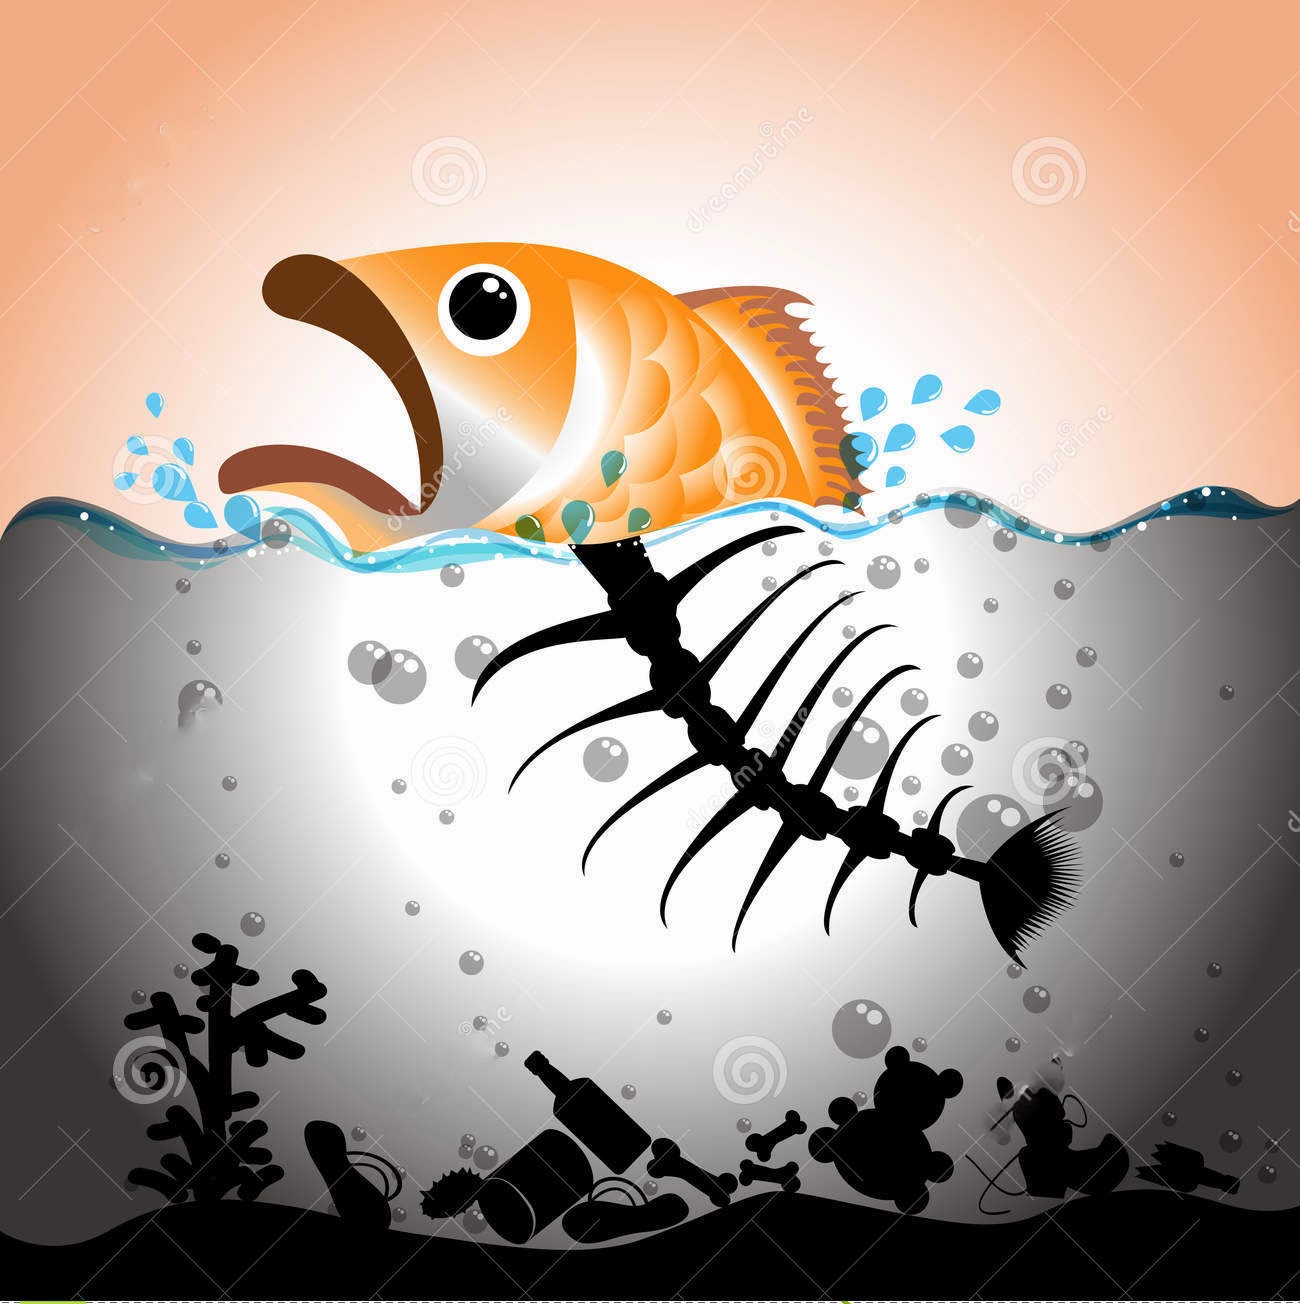 clipart on water pollution - photo #26